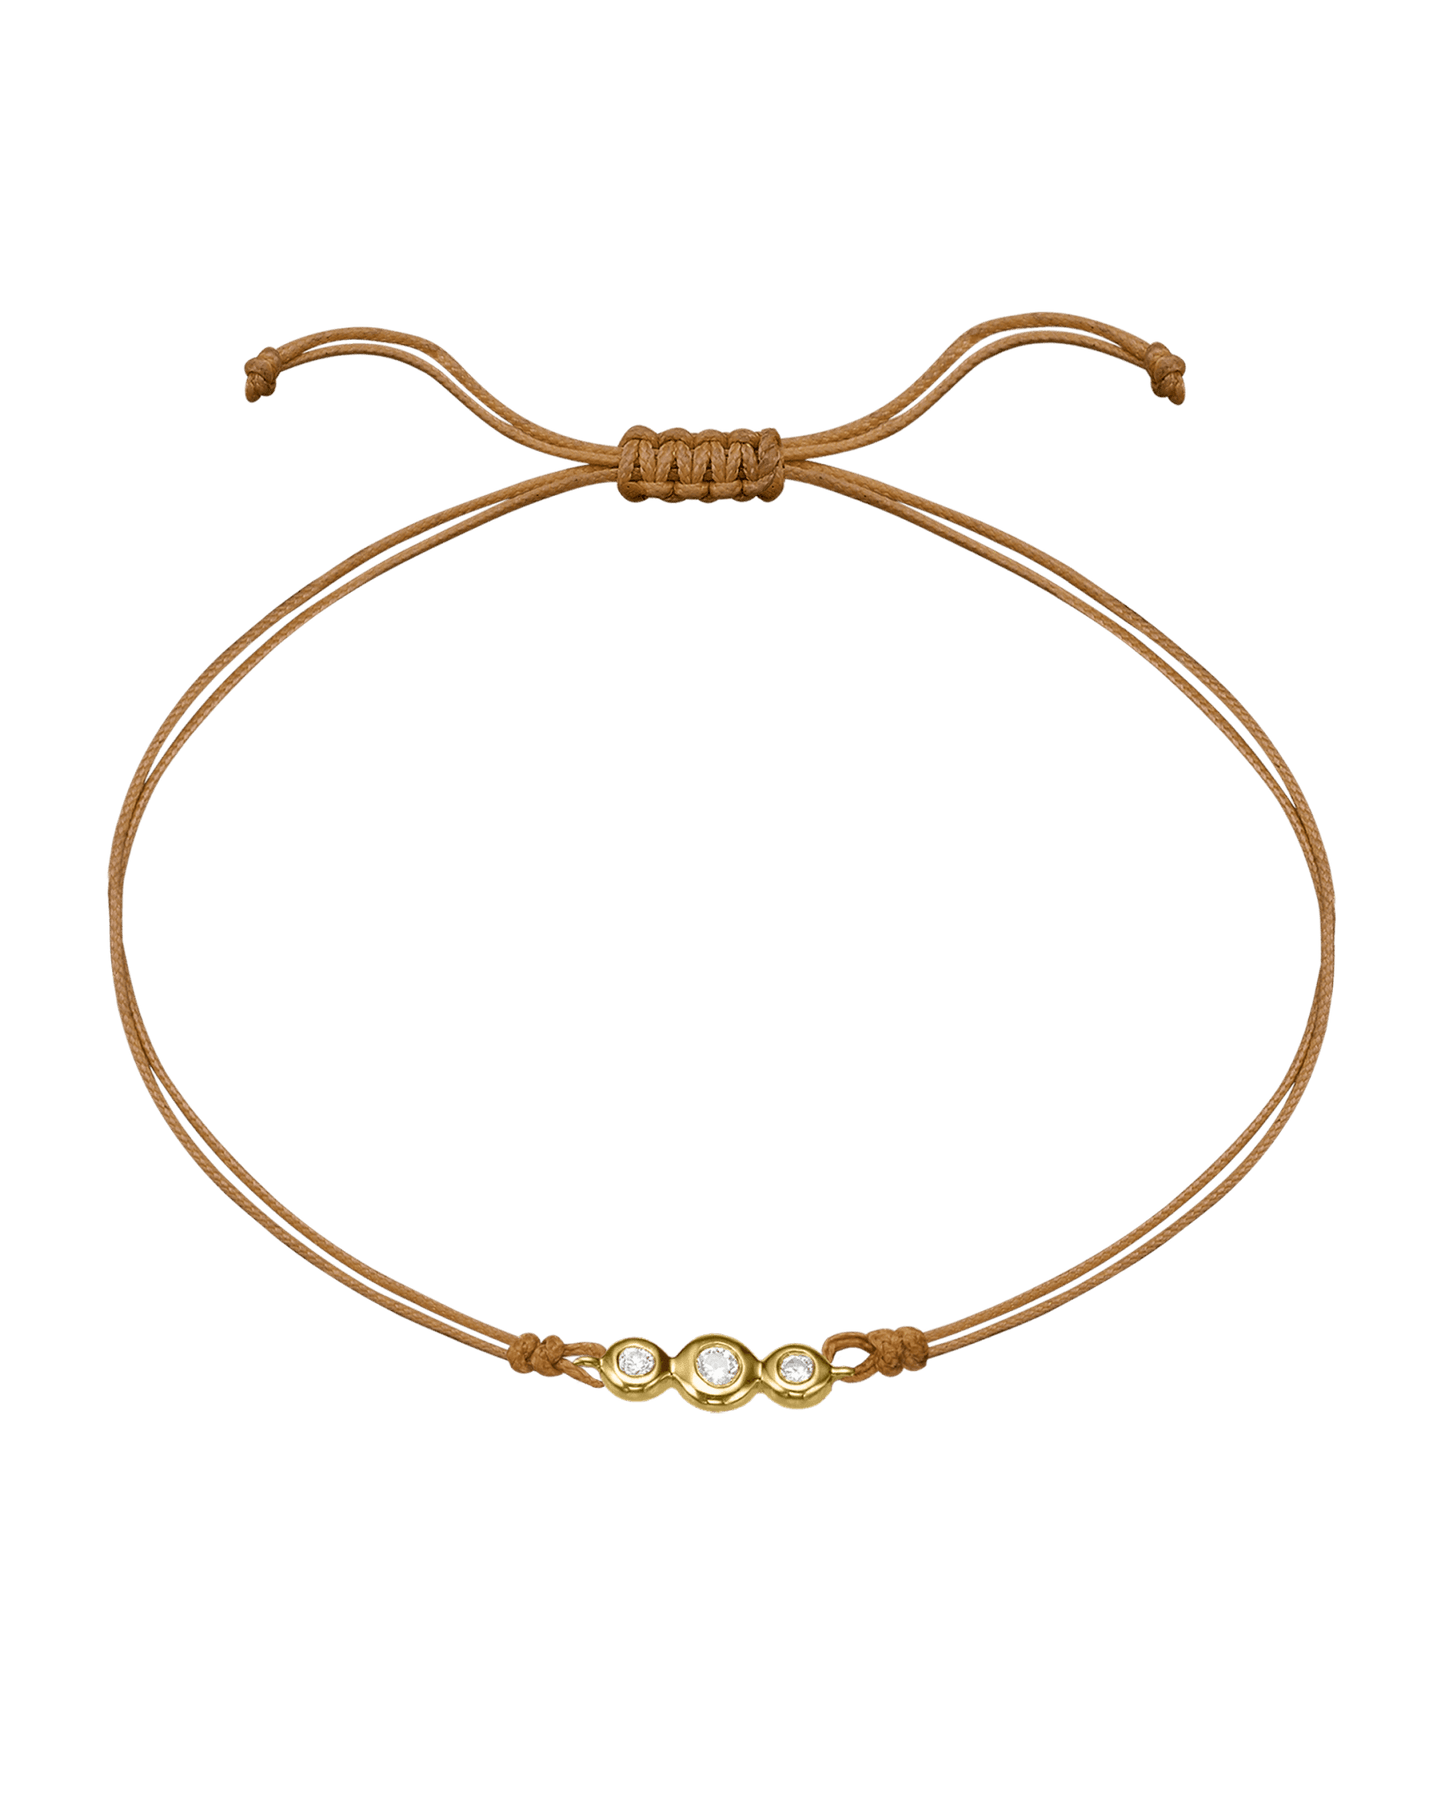 The Three of Us Diamond String of love - 14K Yellow Gold Bracelet 14K Solid Gold Camel 